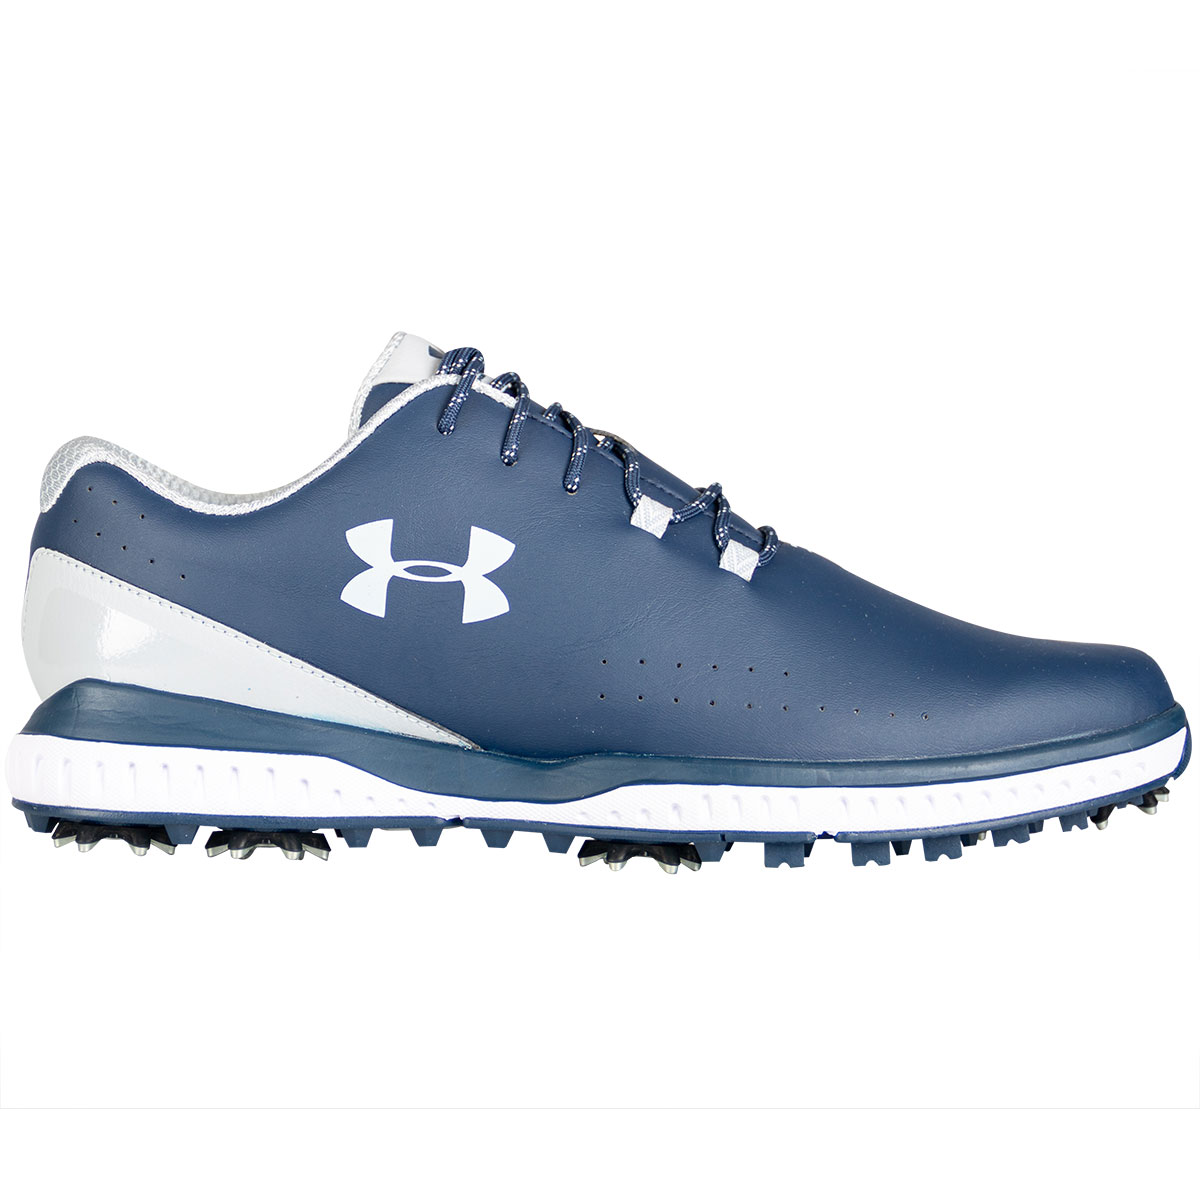 under armour medal rst shoes review